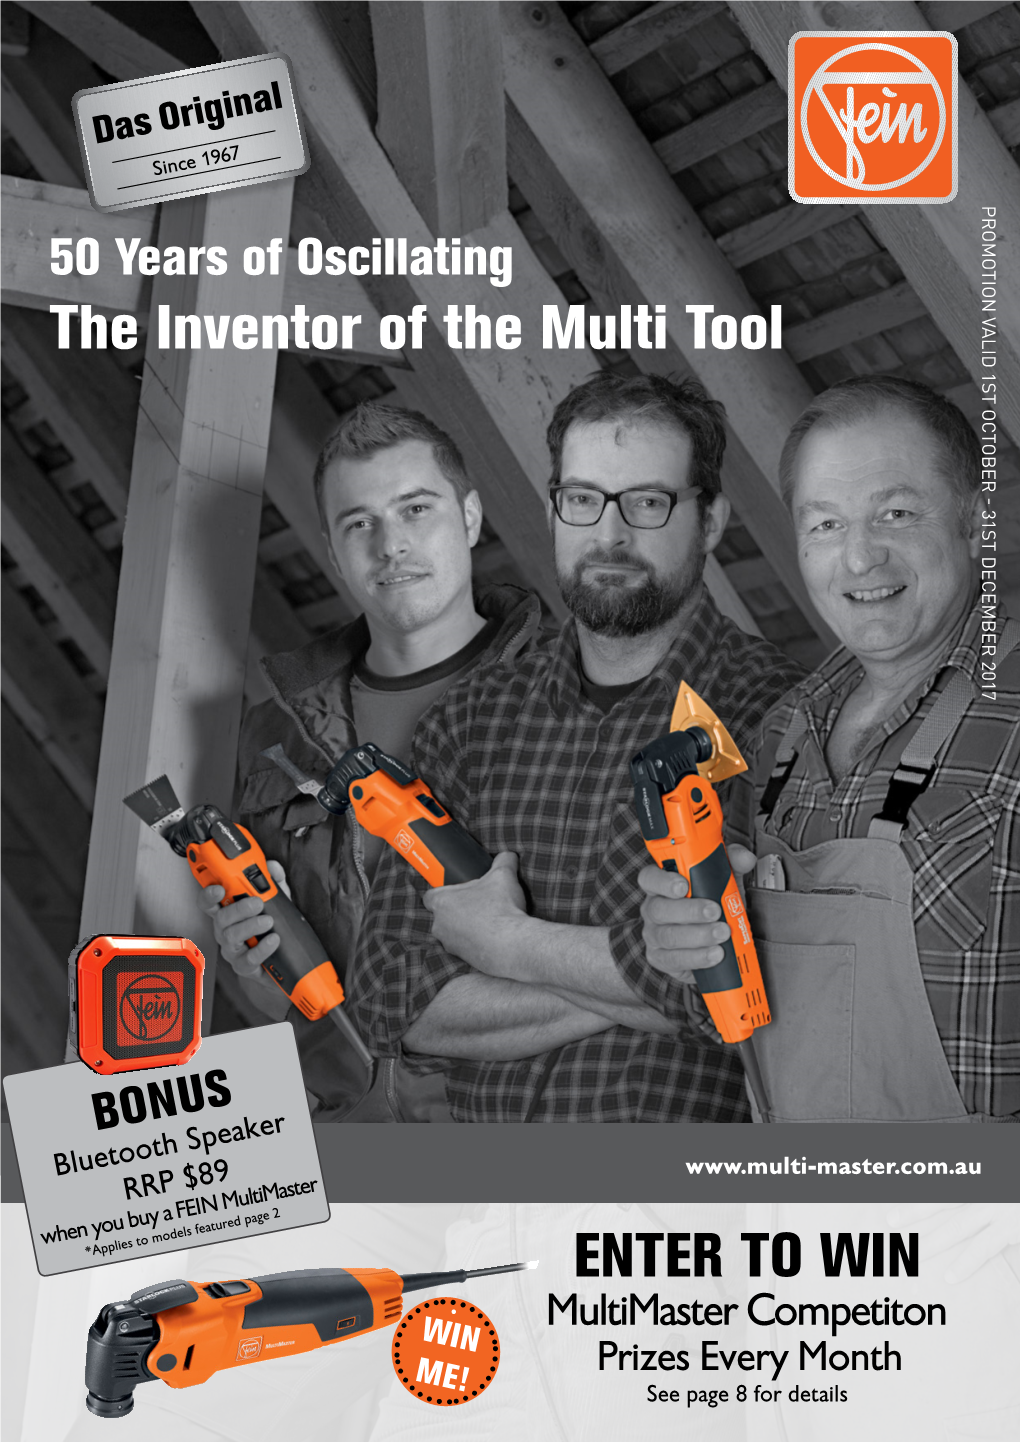 ENTER to WIN the Inventor of the Multi Tool